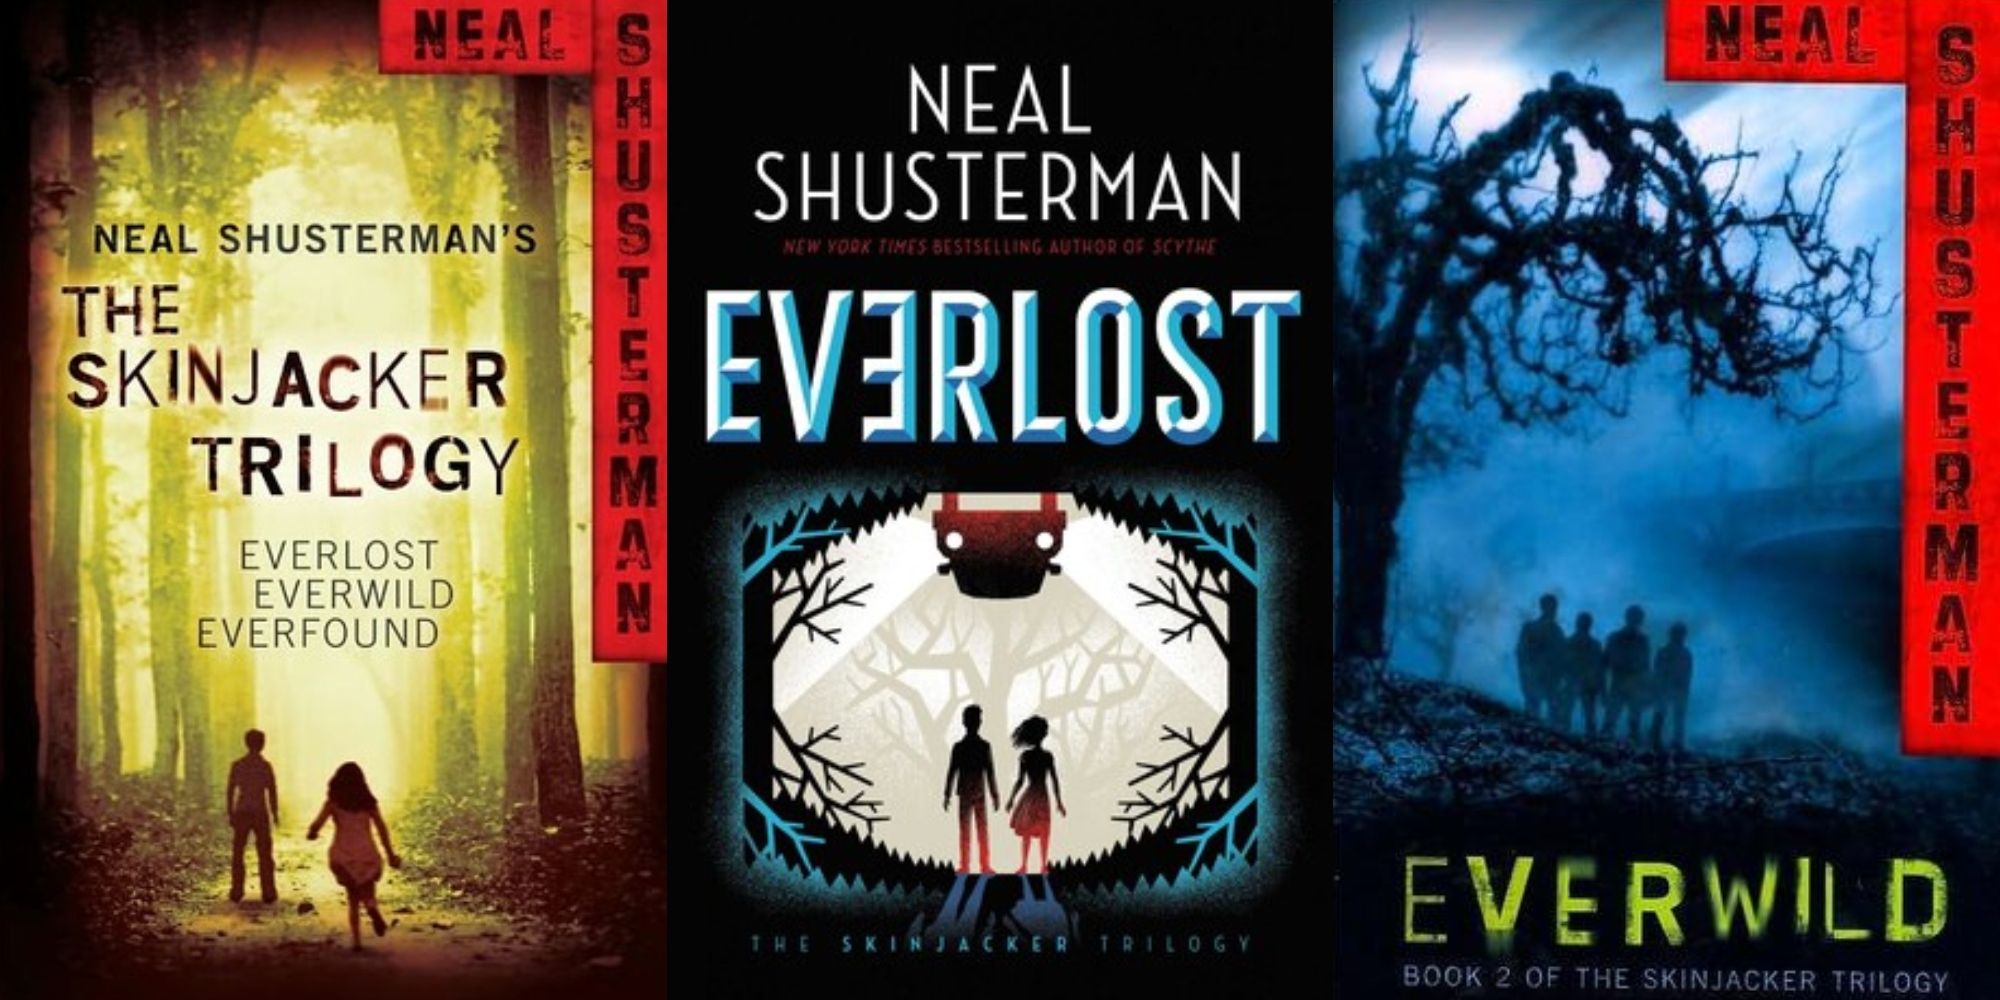 Everlost as depicted on three book covers from the Skinjacker Trilogy